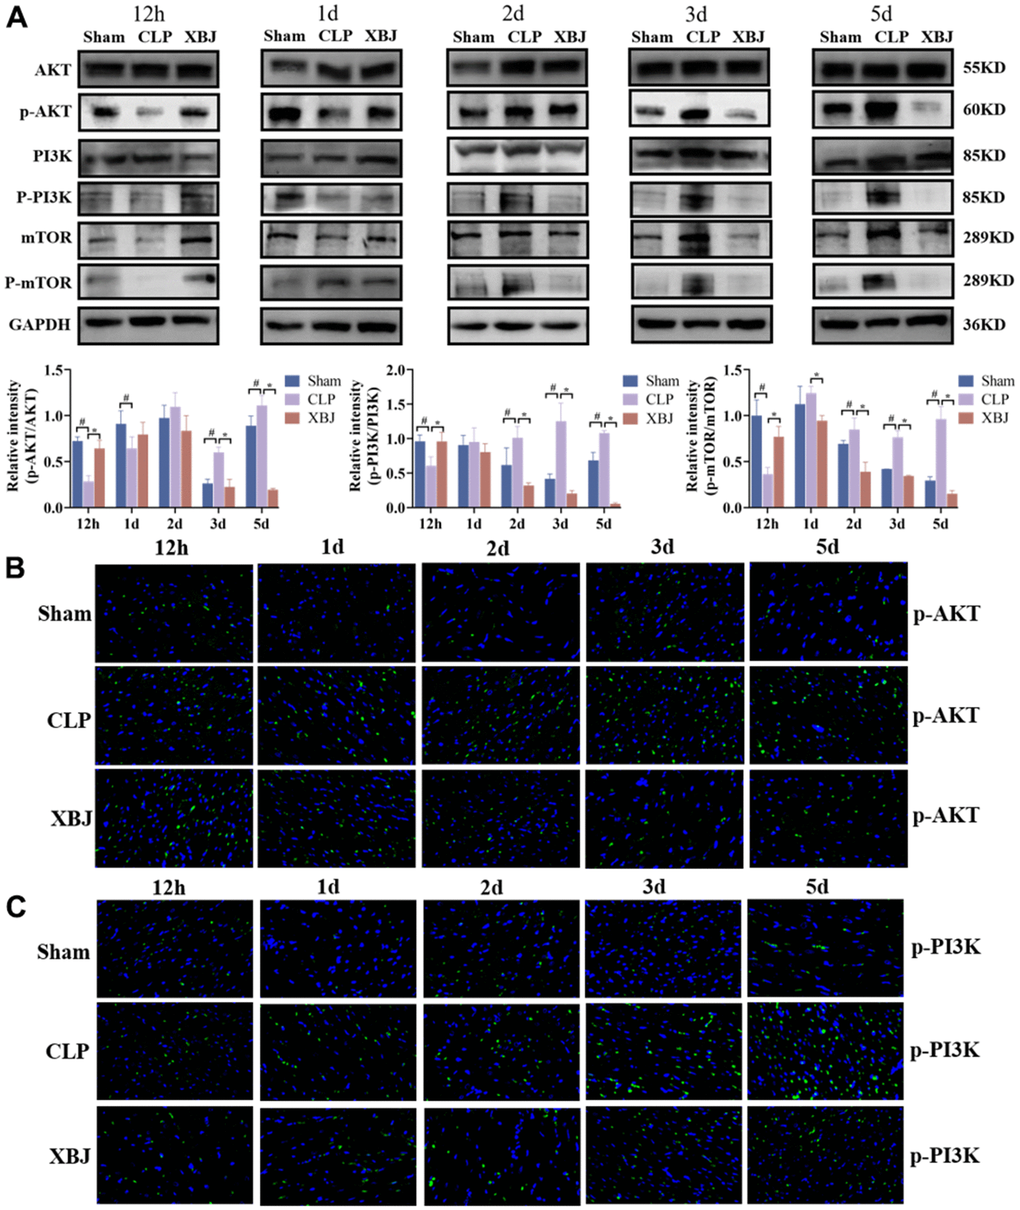 Effects of XBJ on the PI3K/AKT/mTOR signaling pathway of heart tissue in rat at 12h, 1d, 2d, 3d and 5d after CLP. (A) Representative images and relative intensity of western blot for AKT, p-AKT, PI3K, p-PI3K, mTOR and p-mTOR. (B) Representative images of immunofluorescence for p-AKT. (C) Representative images of immunofluorescence for p-PI3K.